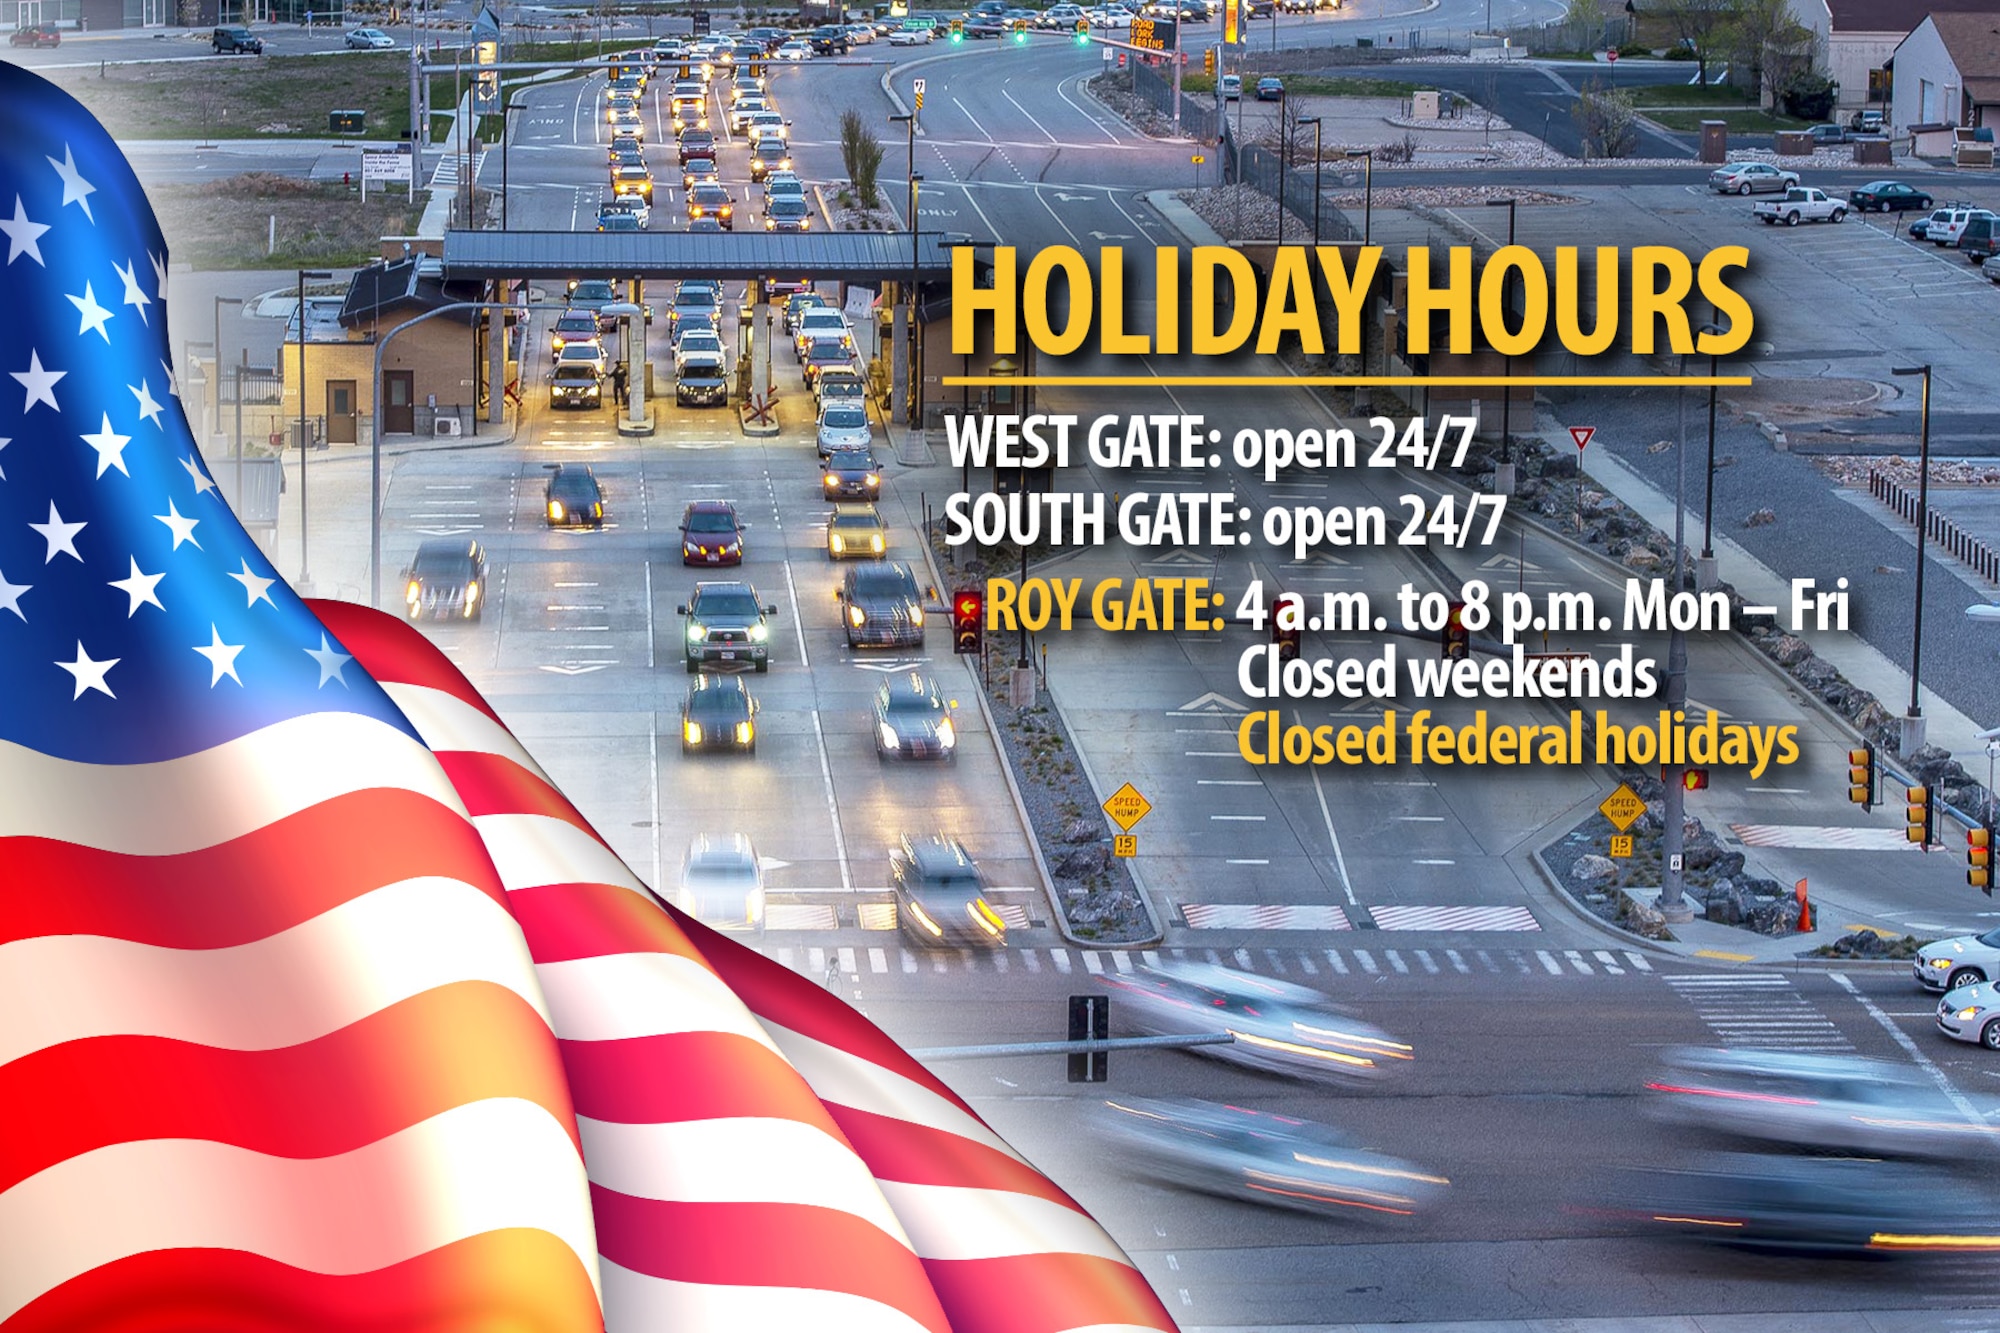 An illustration depicting Hill Air Force Base's West, South and Roy Gate hours for federal holidays. For Columbus Day on Monday, Oct. 14, 2019, the South Gate and West Gate will be open 24/7. The Roy Gate will be closed.